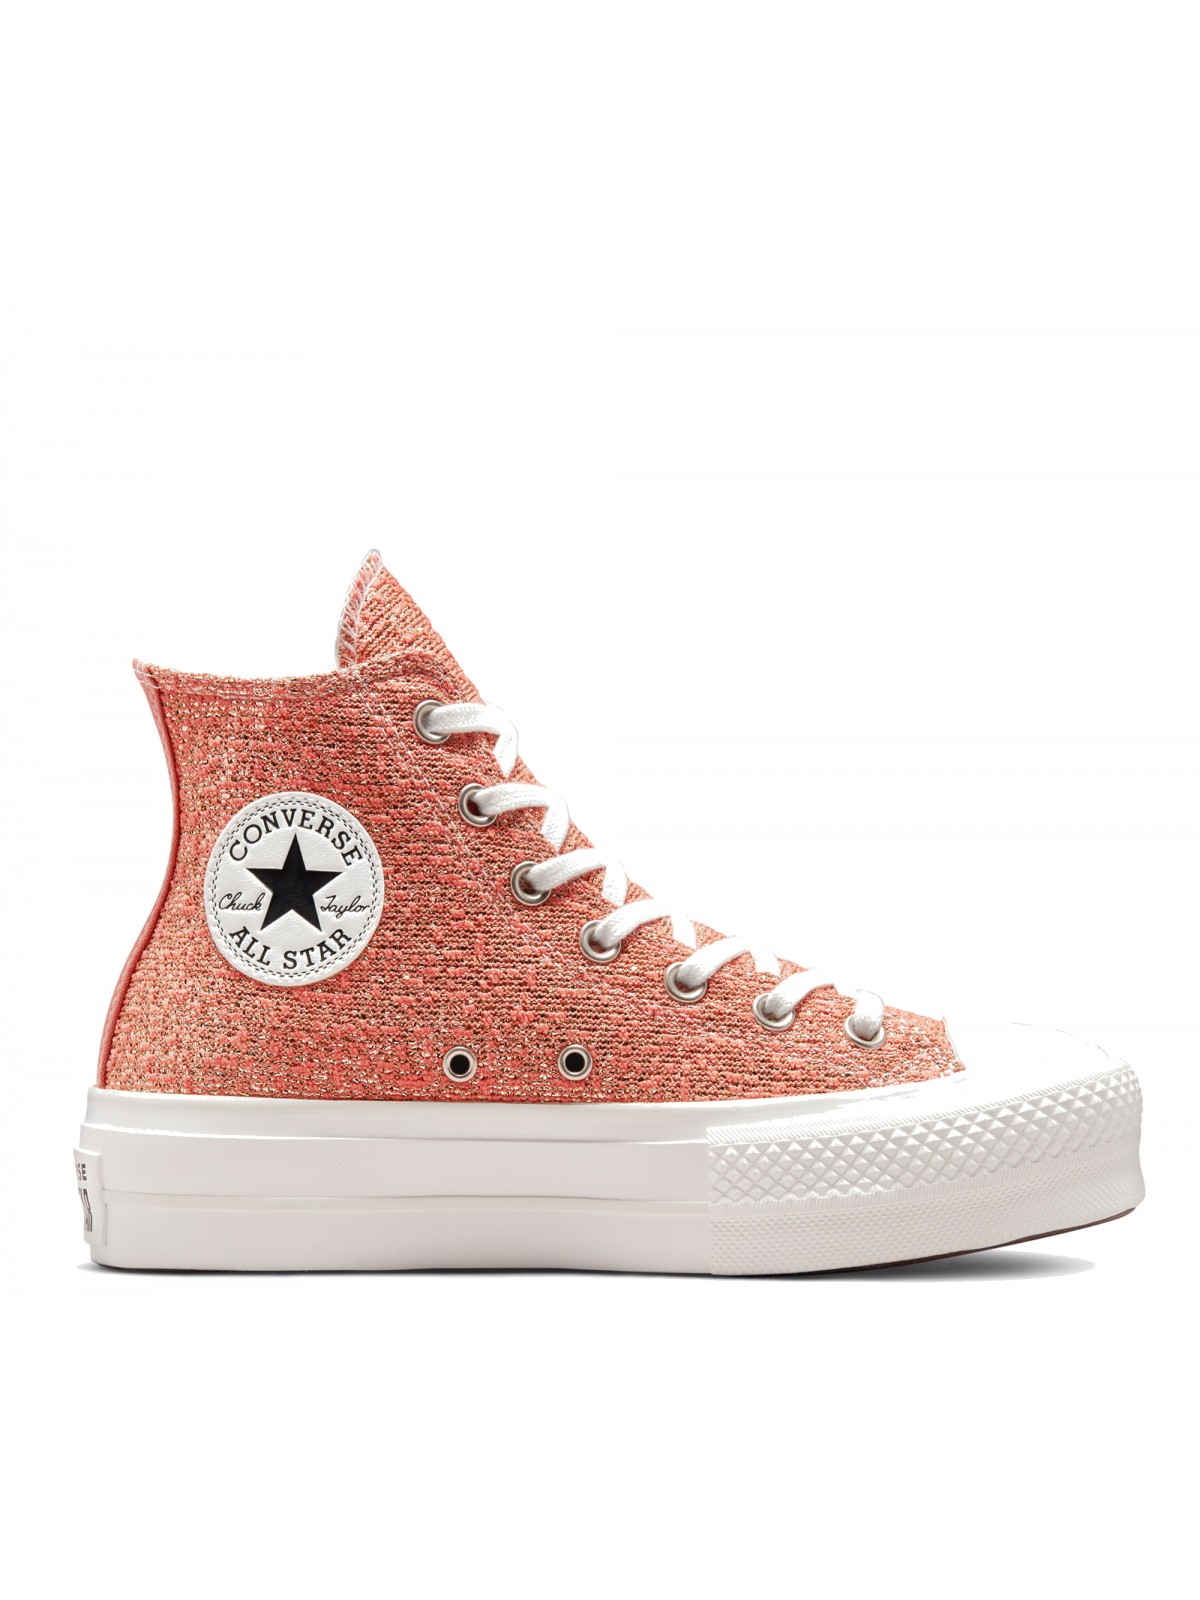 Converse Chuck Taylor all star Lift plateforme Clay / light gold